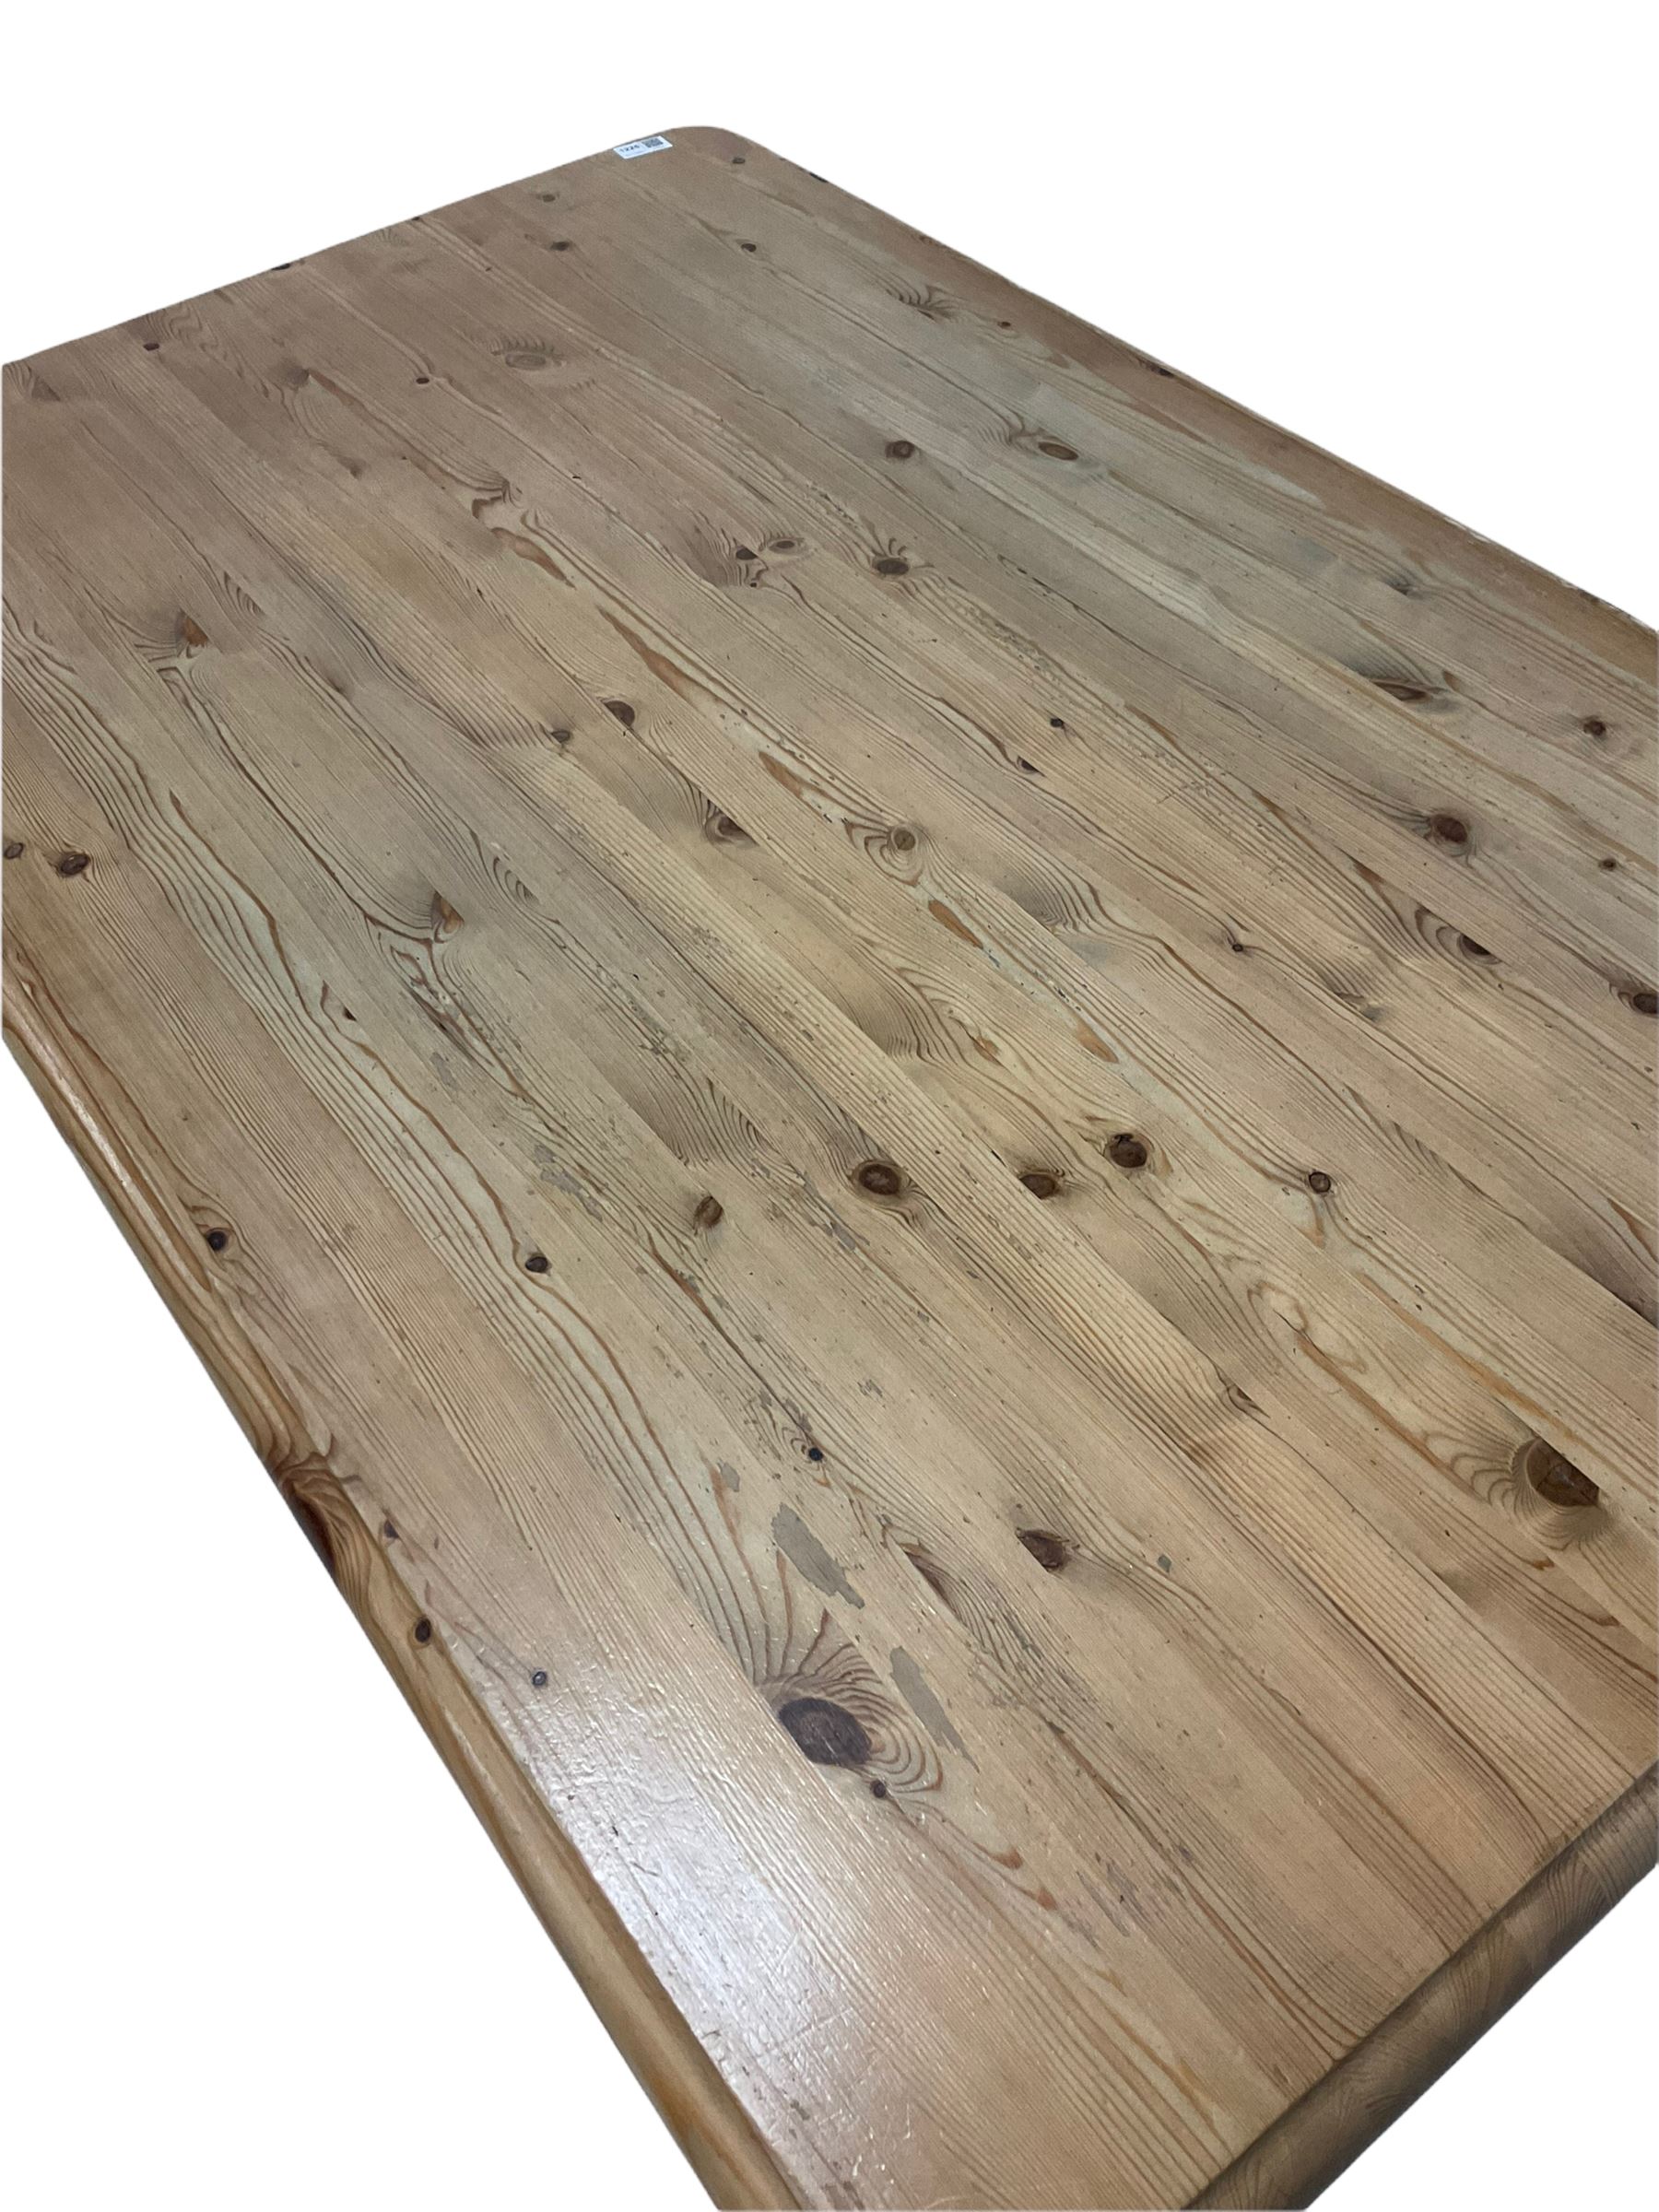 Traditional farmhouse waxed pine dining table - Image 3 of 4